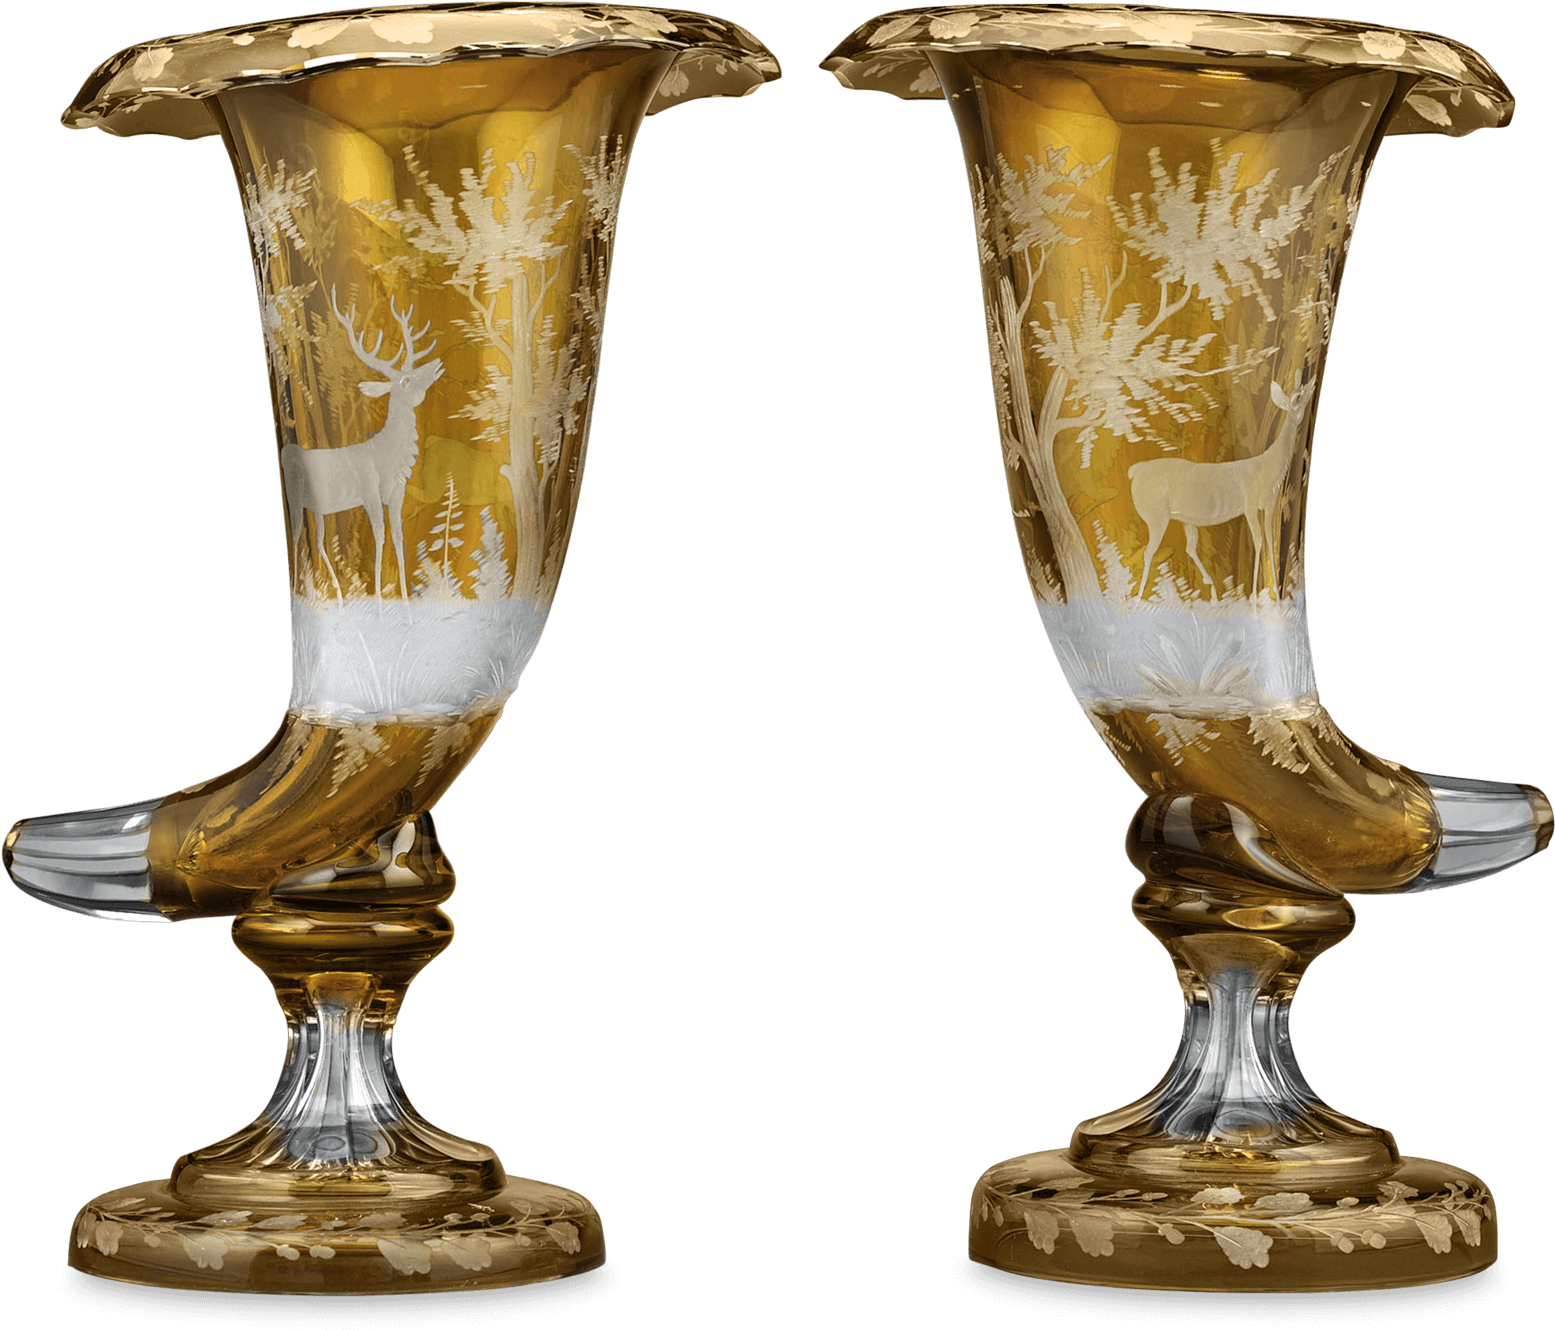 Antique Glass PNG Free Download